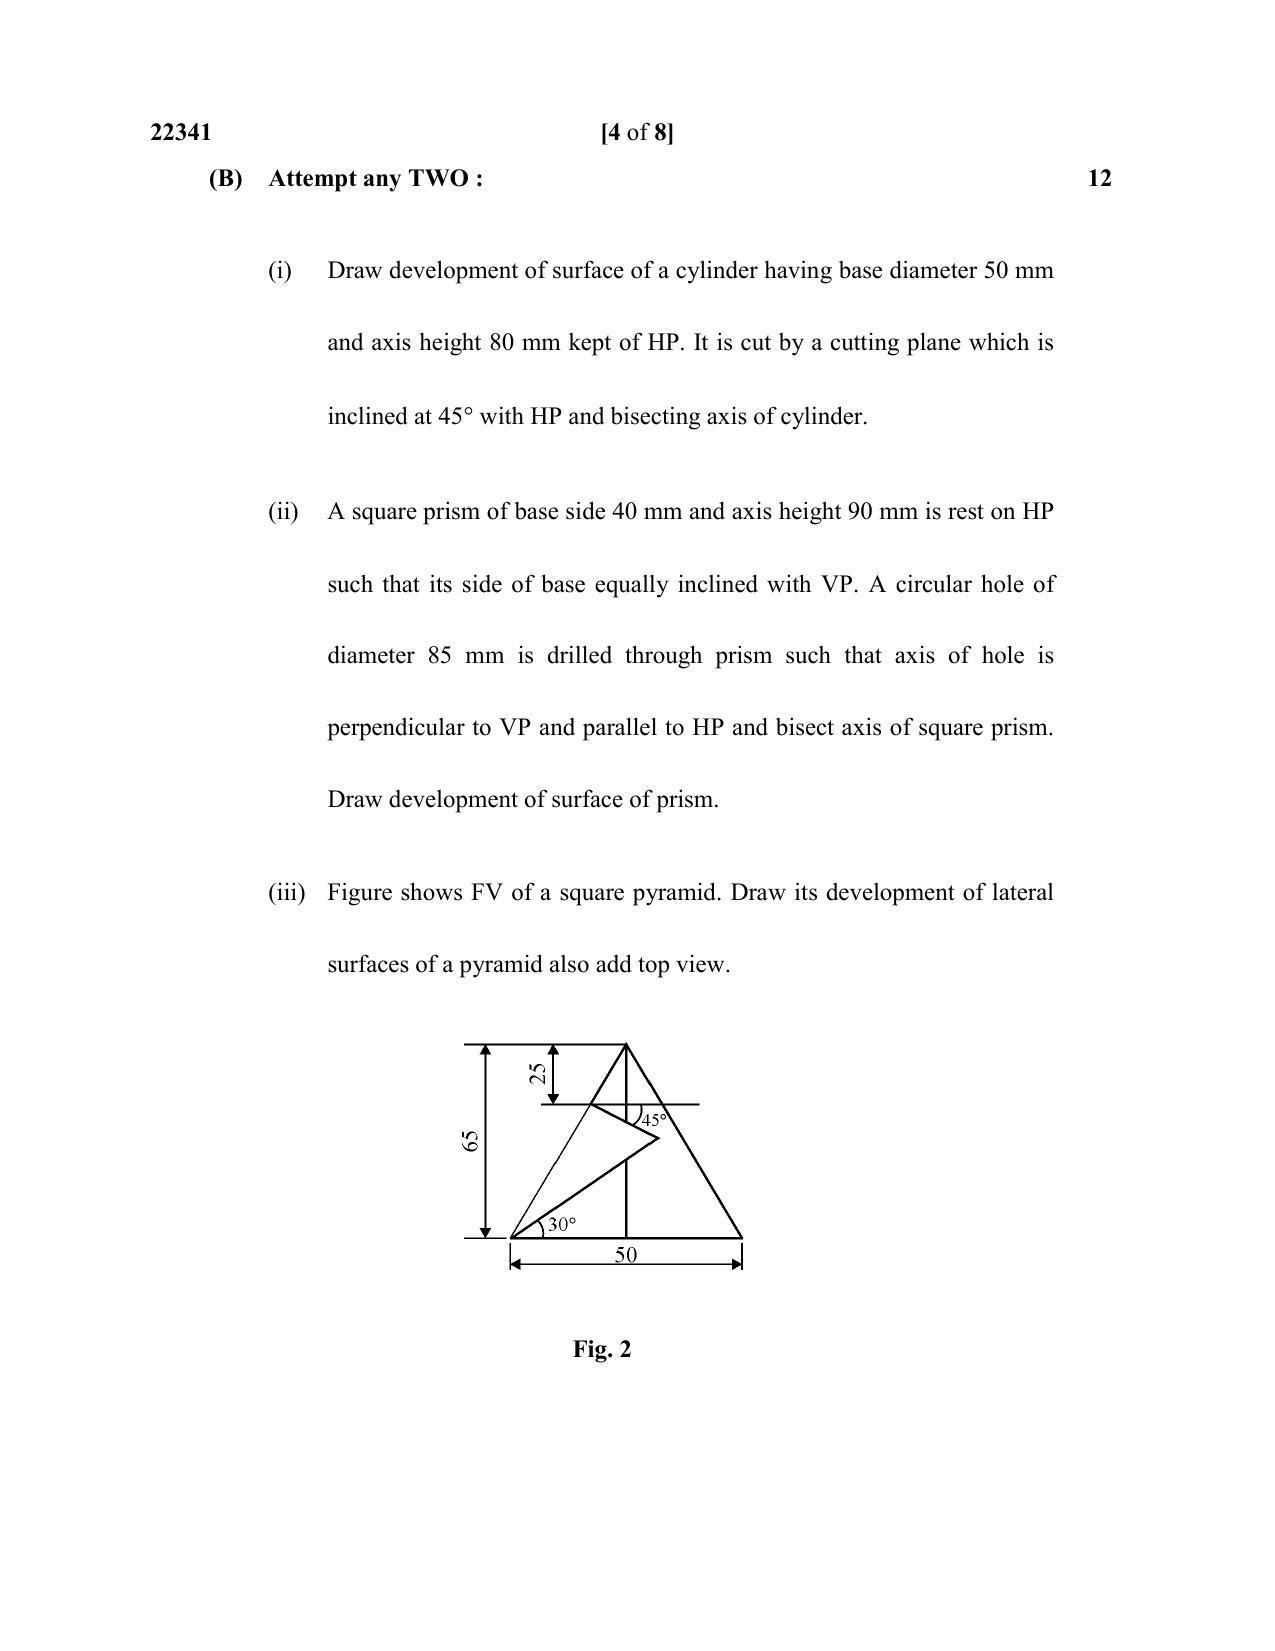 MSBTE Question Paper - 2019 - Mechanical working Drawing - Page 4